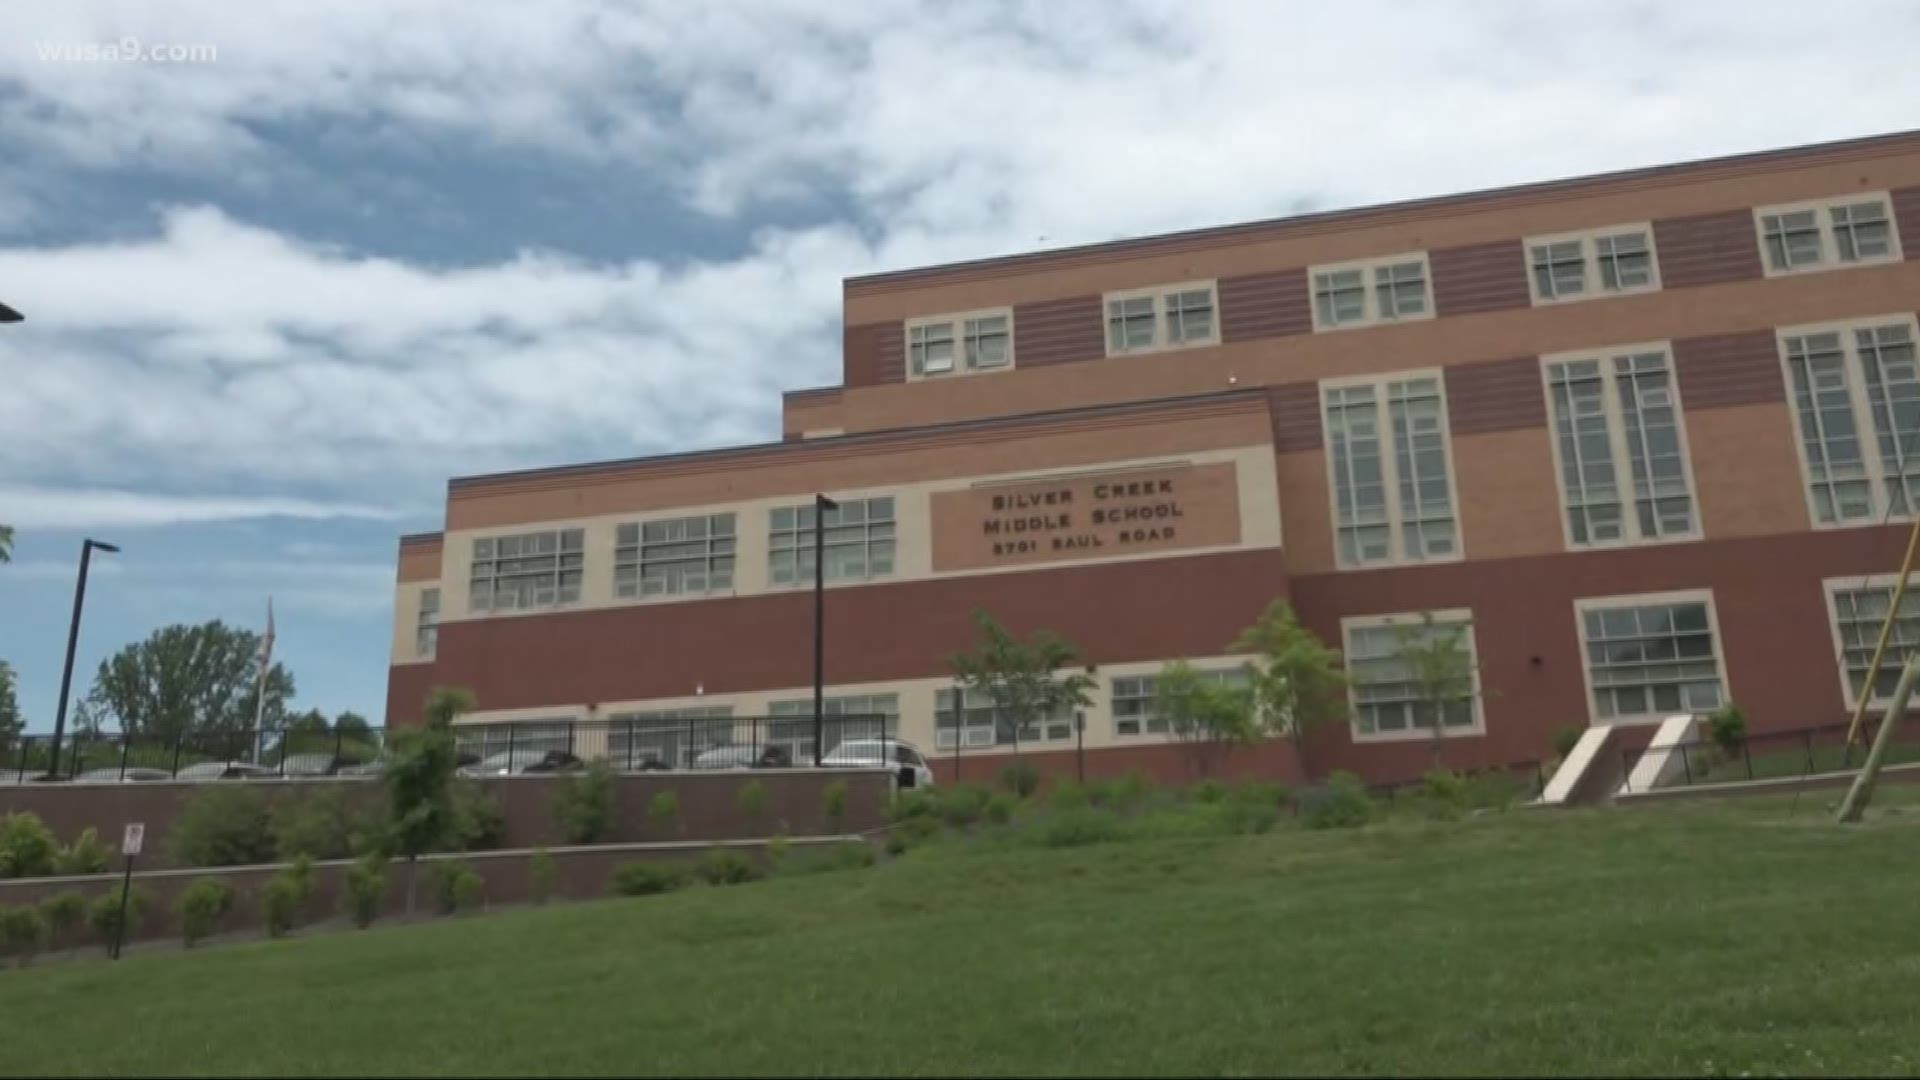 Another swastika was found in a school's bathroom-- this time, at Silver Creek Middle School. This is just the latest hate-filled incident to hit Montgomery County Public Schools.